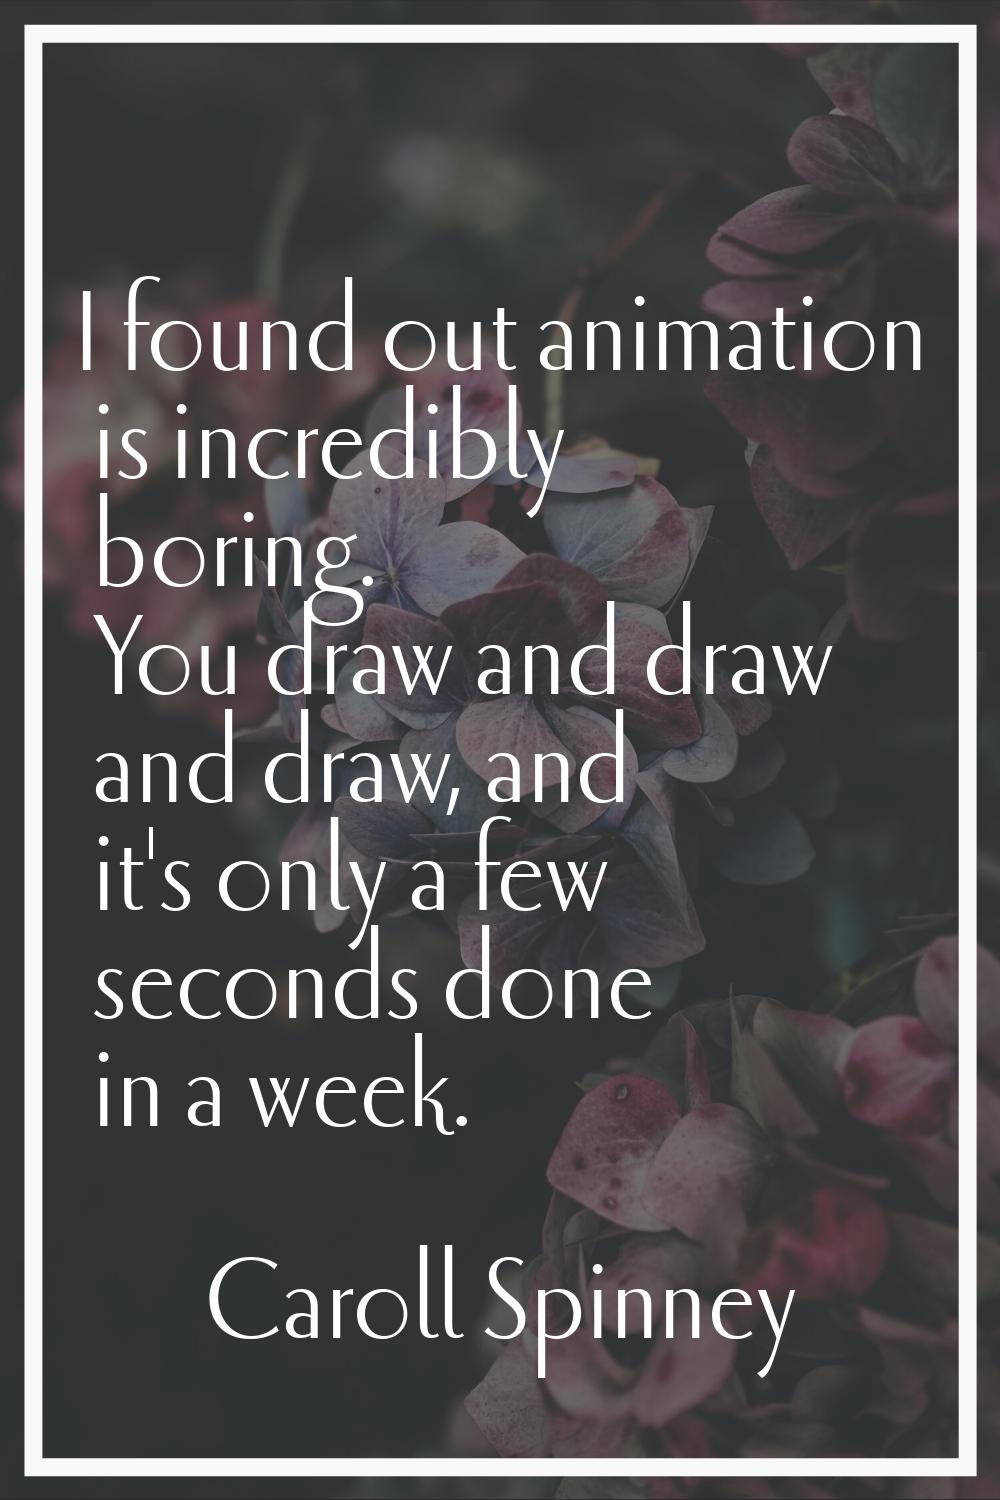 I found out animation is incredibly boring. You draw and draw and draw, and it's only a few seconds